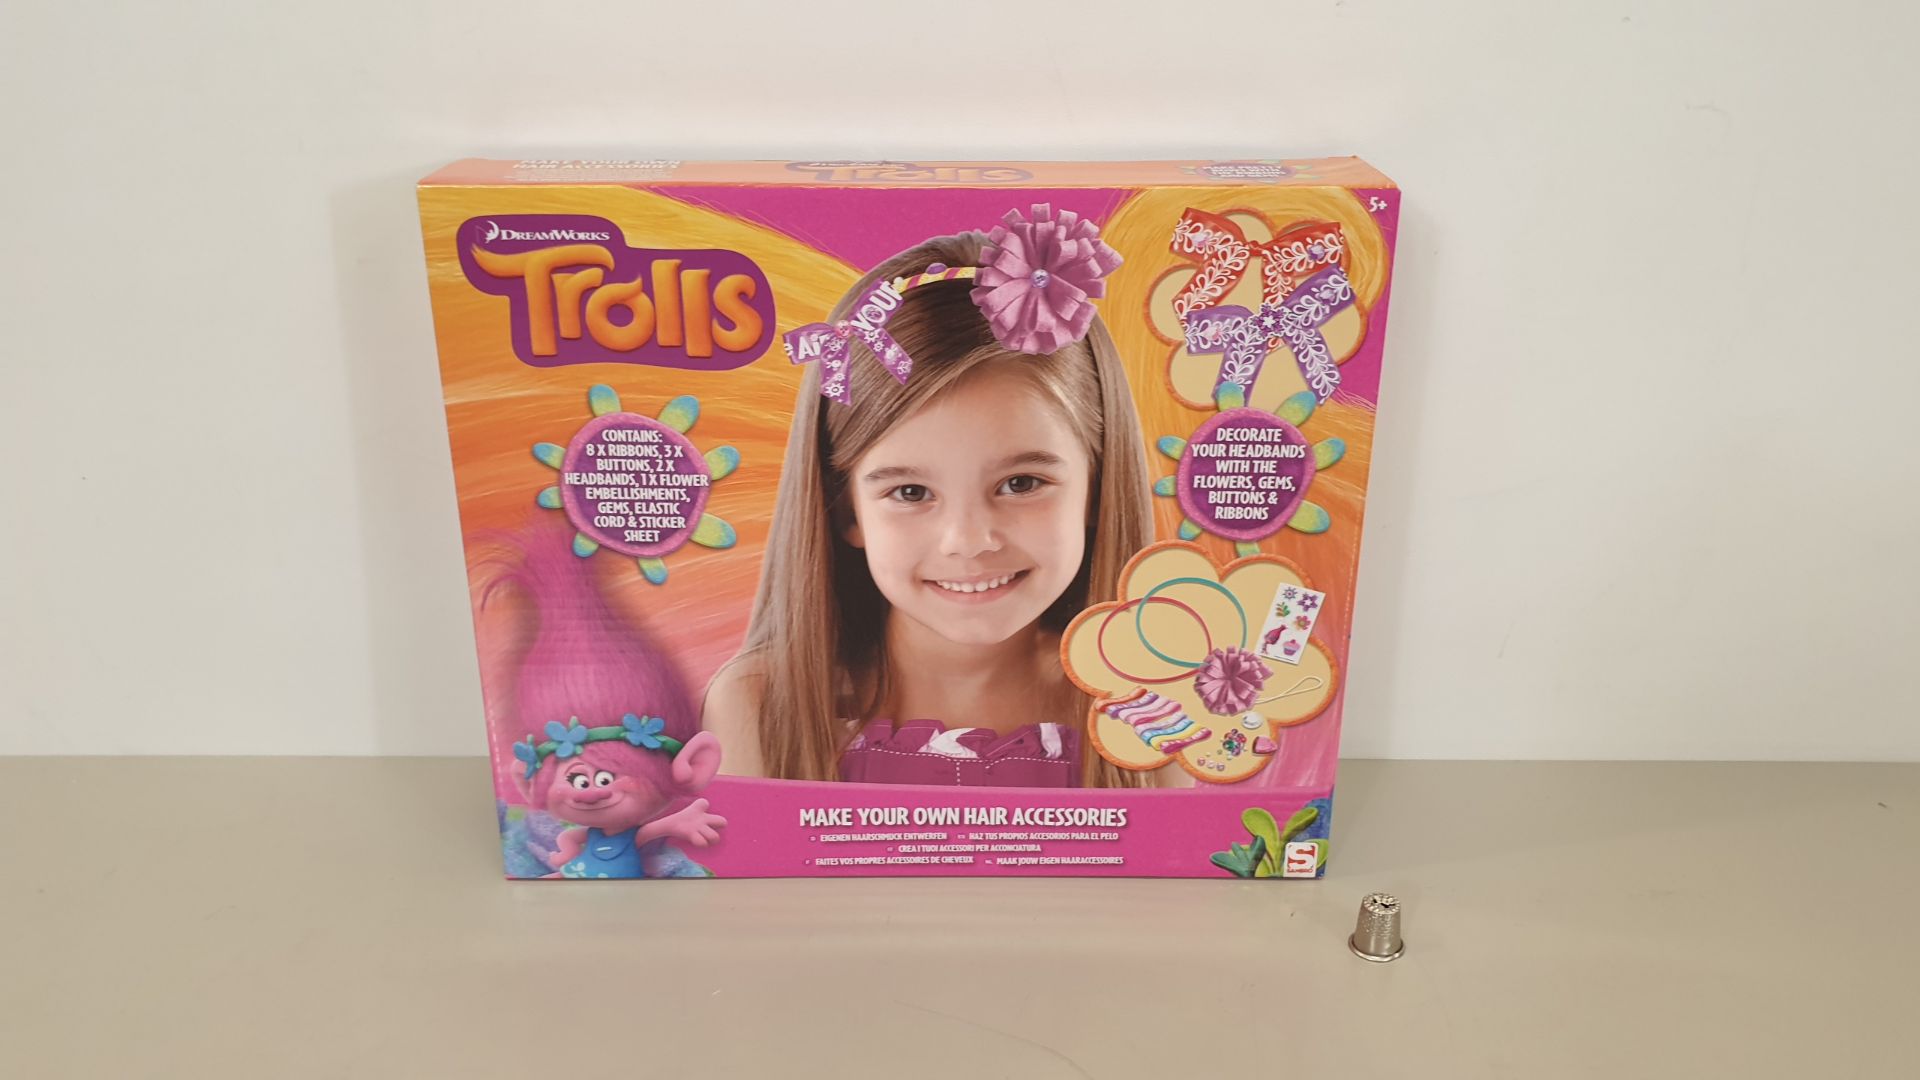 56 X BRAND NEW TROLLS MAKE YOUR OWN HAIR ACCESSORIES INCLUDES RIBBONS BUTTONS HEADBANDS ETC.. - IN 7